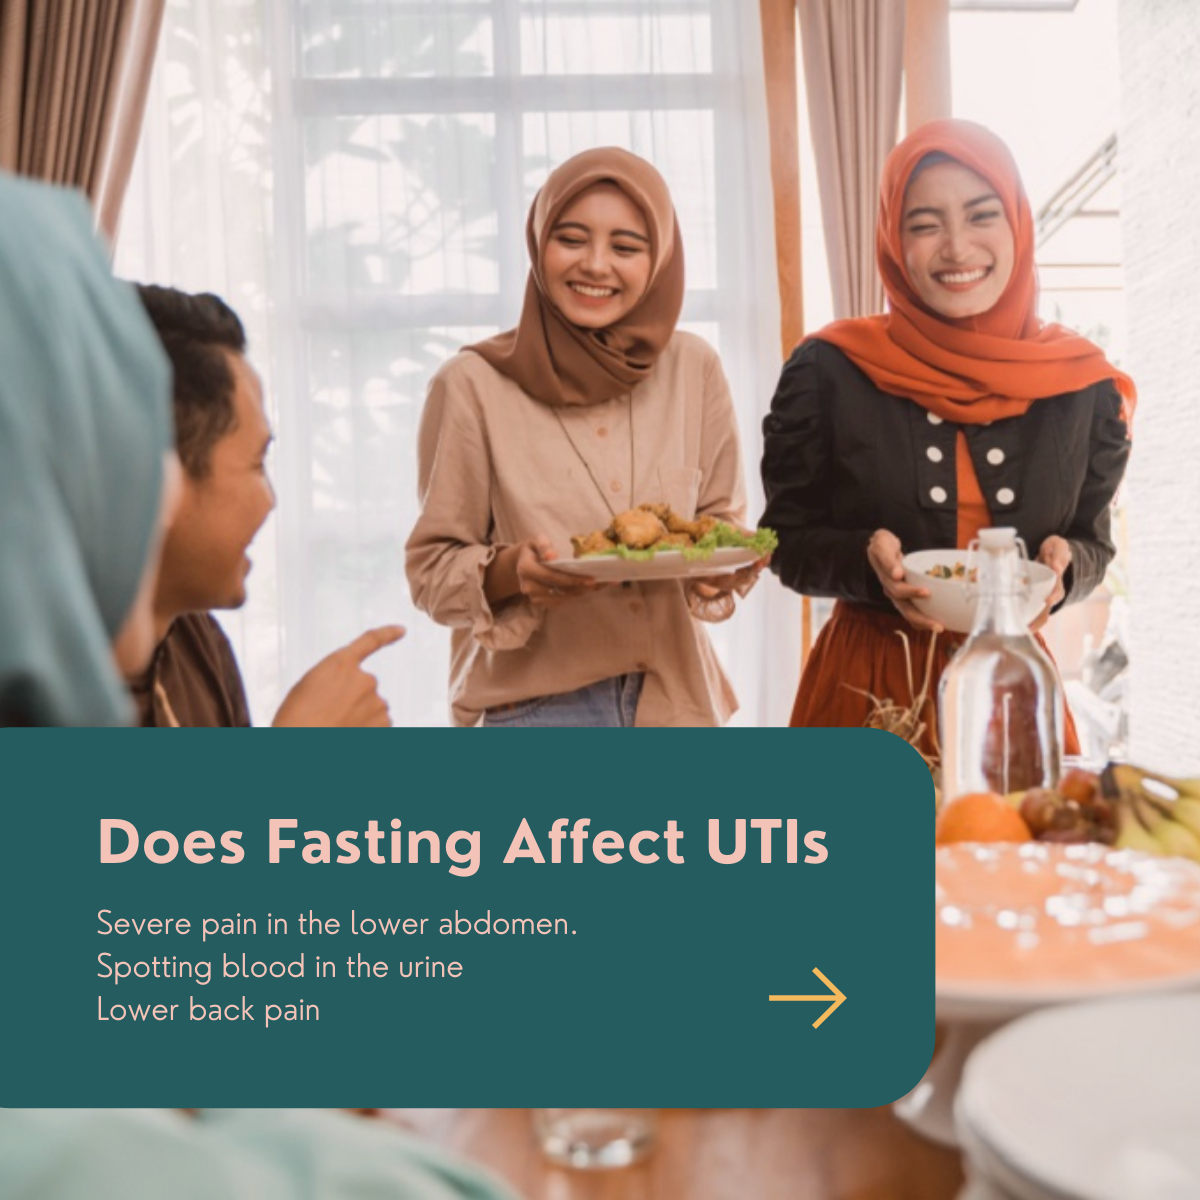 Is it safe for people with UTI to keep fasting during Ramadan?